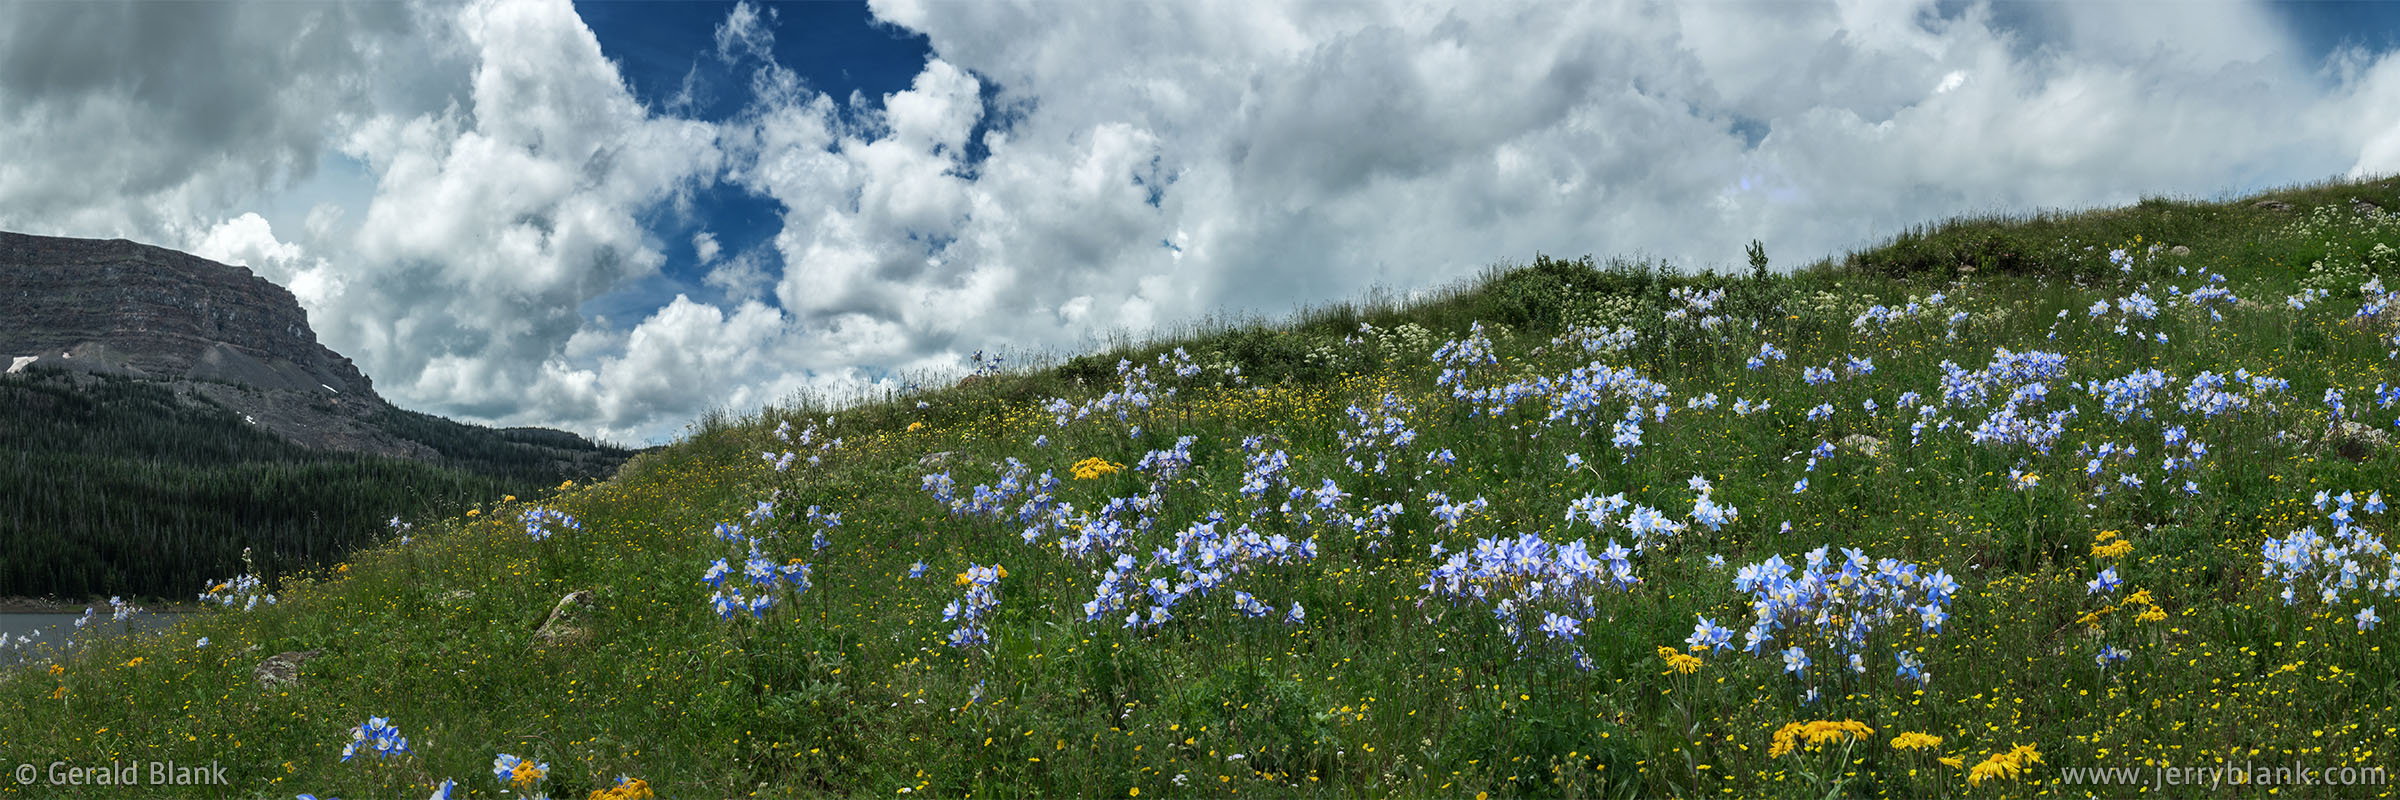 #60148 - Rocky Mountain columbines, goldeneye, and arnica cover the meadows above the north shore of Stillwater Reservoir, in Colorado’s Flat Tops National Wilderness Area - photo by Jerry Blank